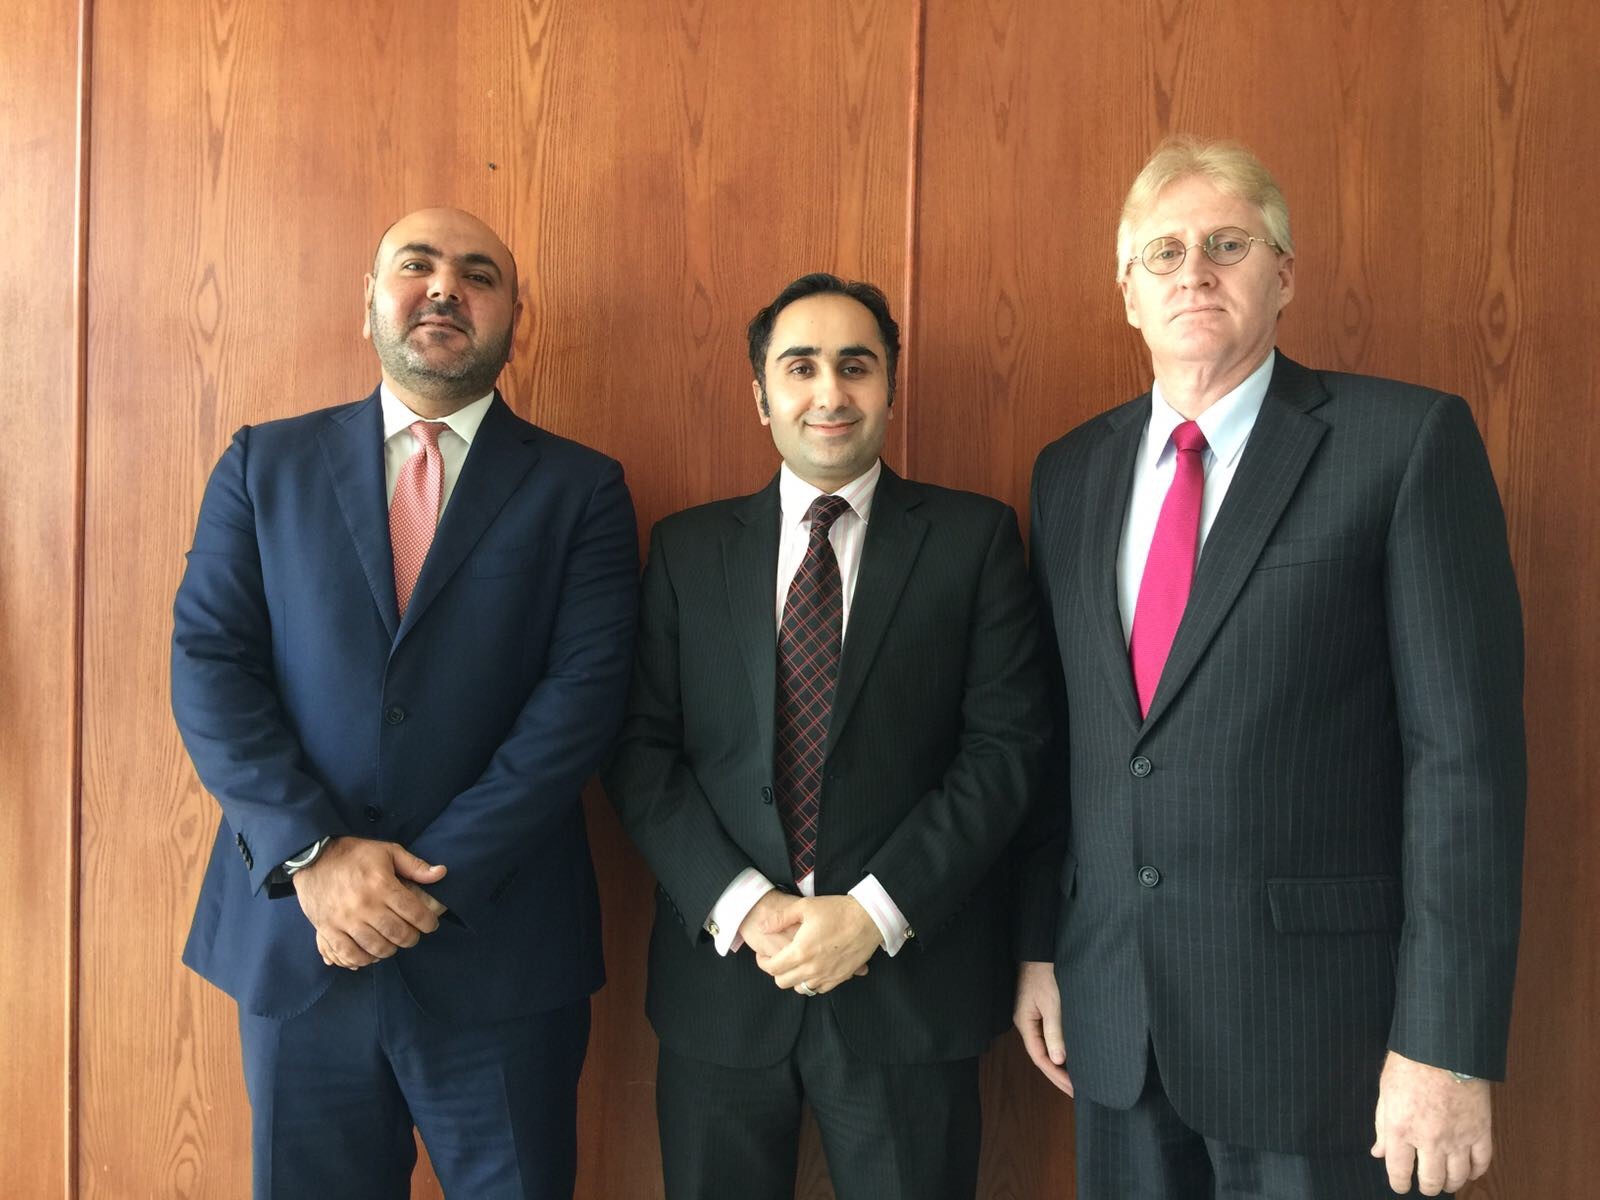  Doha Chapter Leaders. From left to right, Charbel Mehanna, CFE, Imran Zia, CFE, and Ralph Lake, CFE 